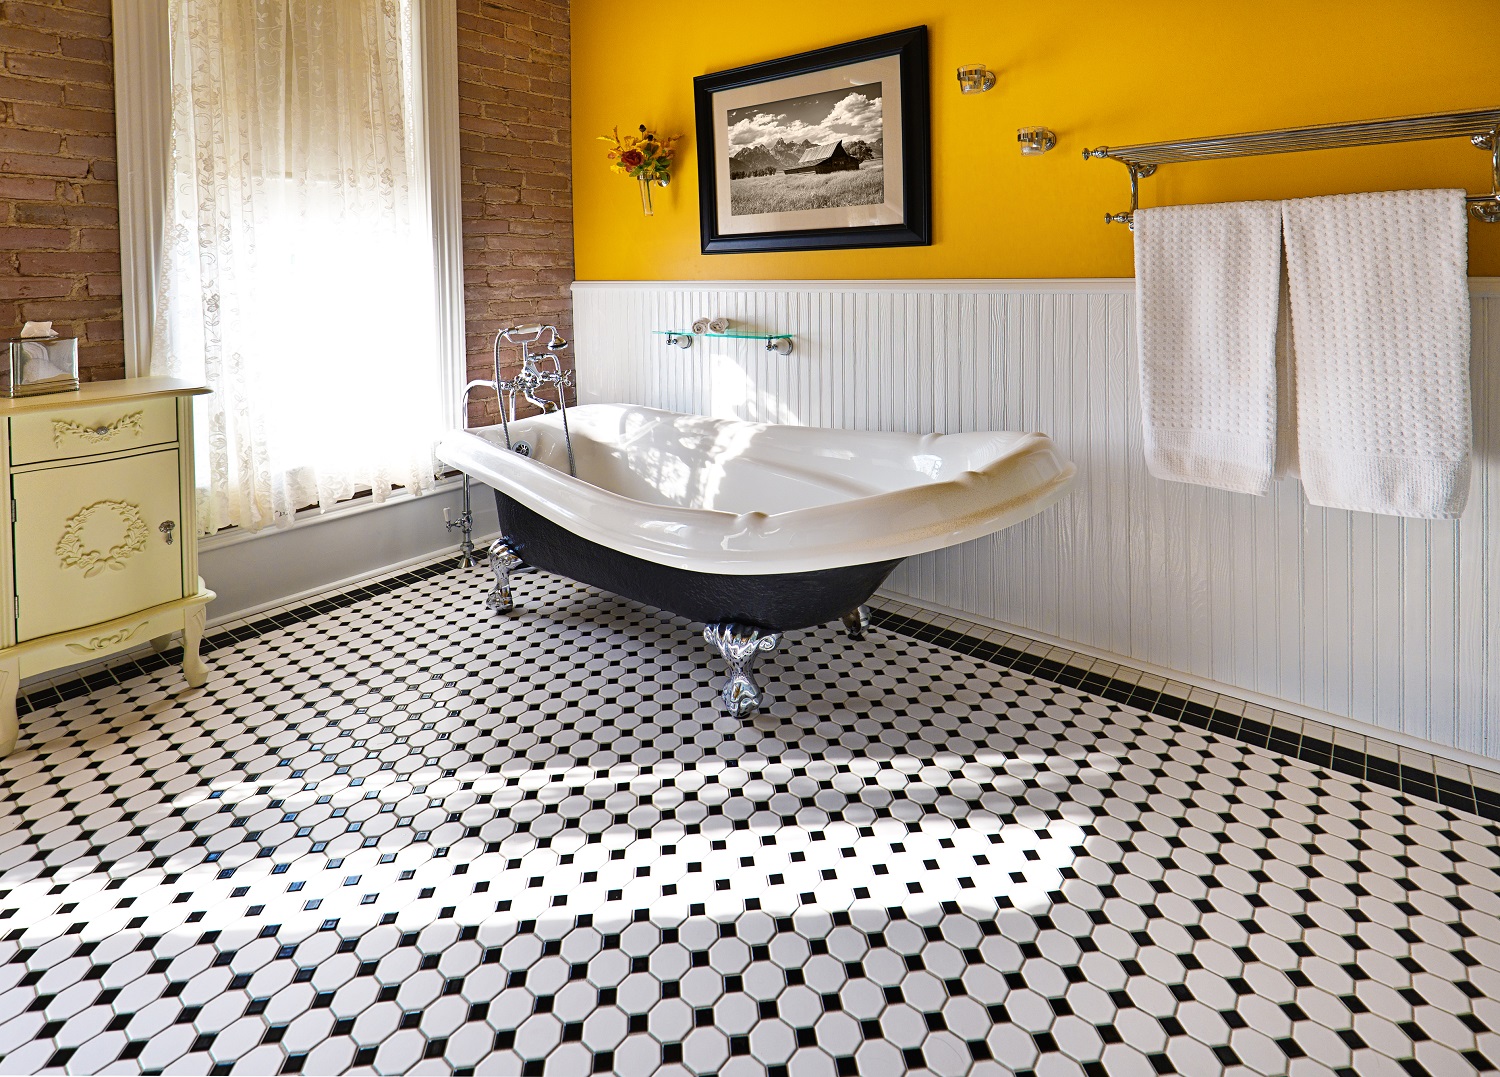 Lifestyle image of a black and white bathroom, with black and white floor tiles and a roll top bath with cast iron legs